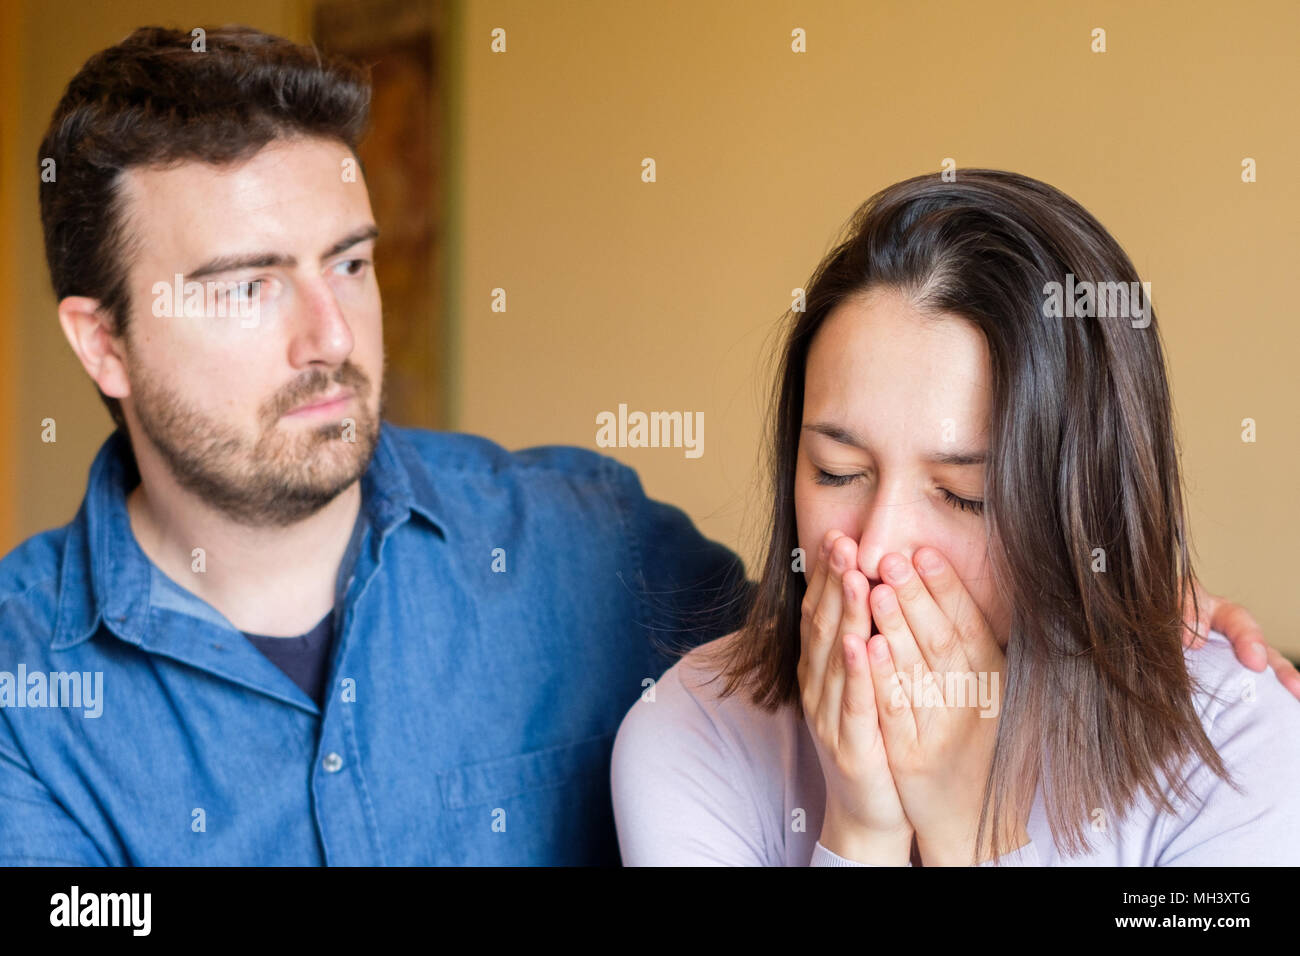 Boyfriend consoling his girlfriend after big fight Stock Photo